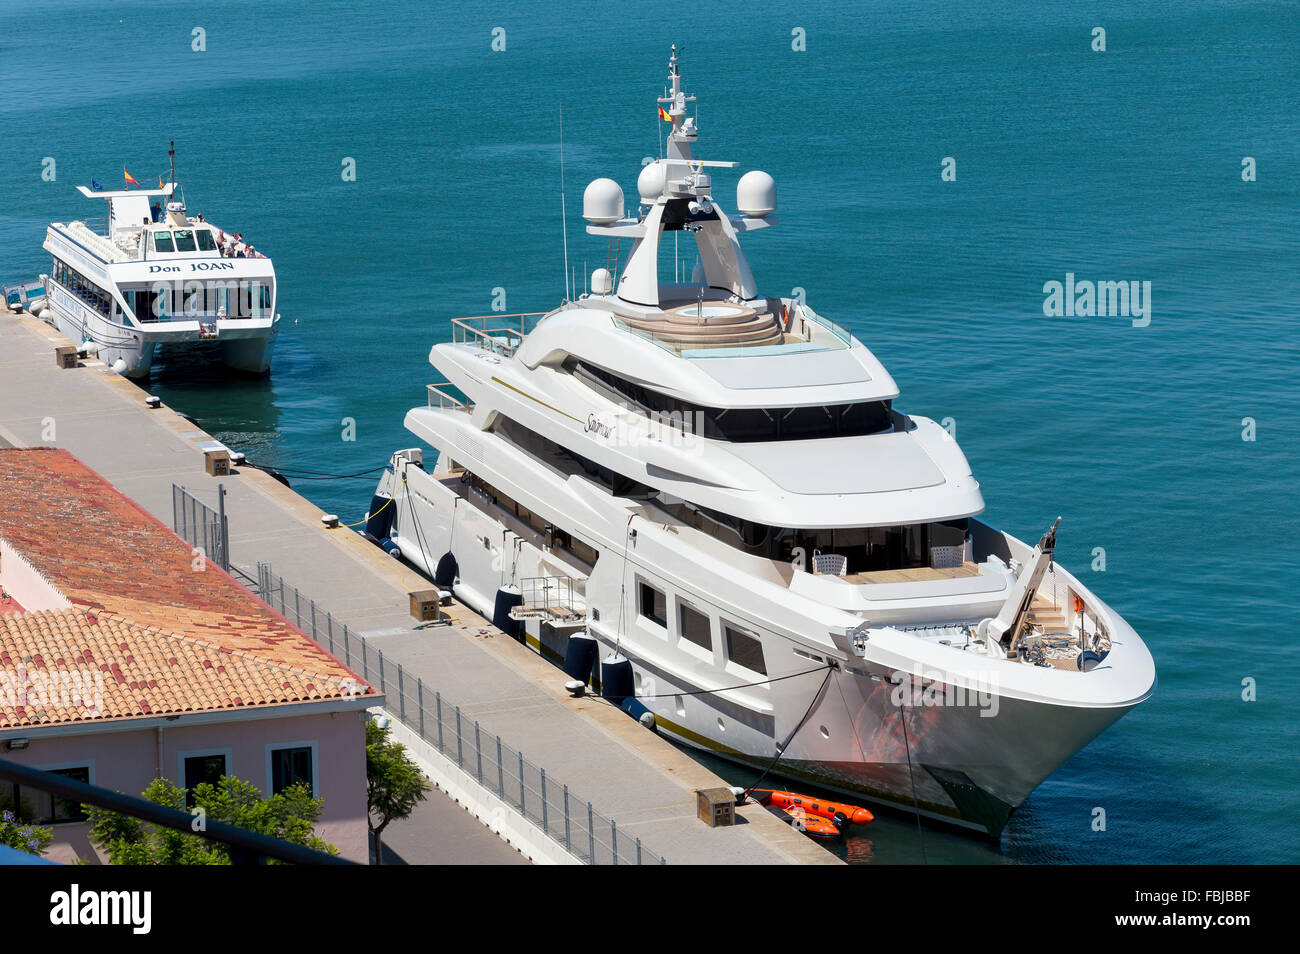 Yacht and excursion boat, harbour of Mao, Mahon, capital of the island Menorca, the Balearic Islands, Spain, Southern Europe Stock Photo